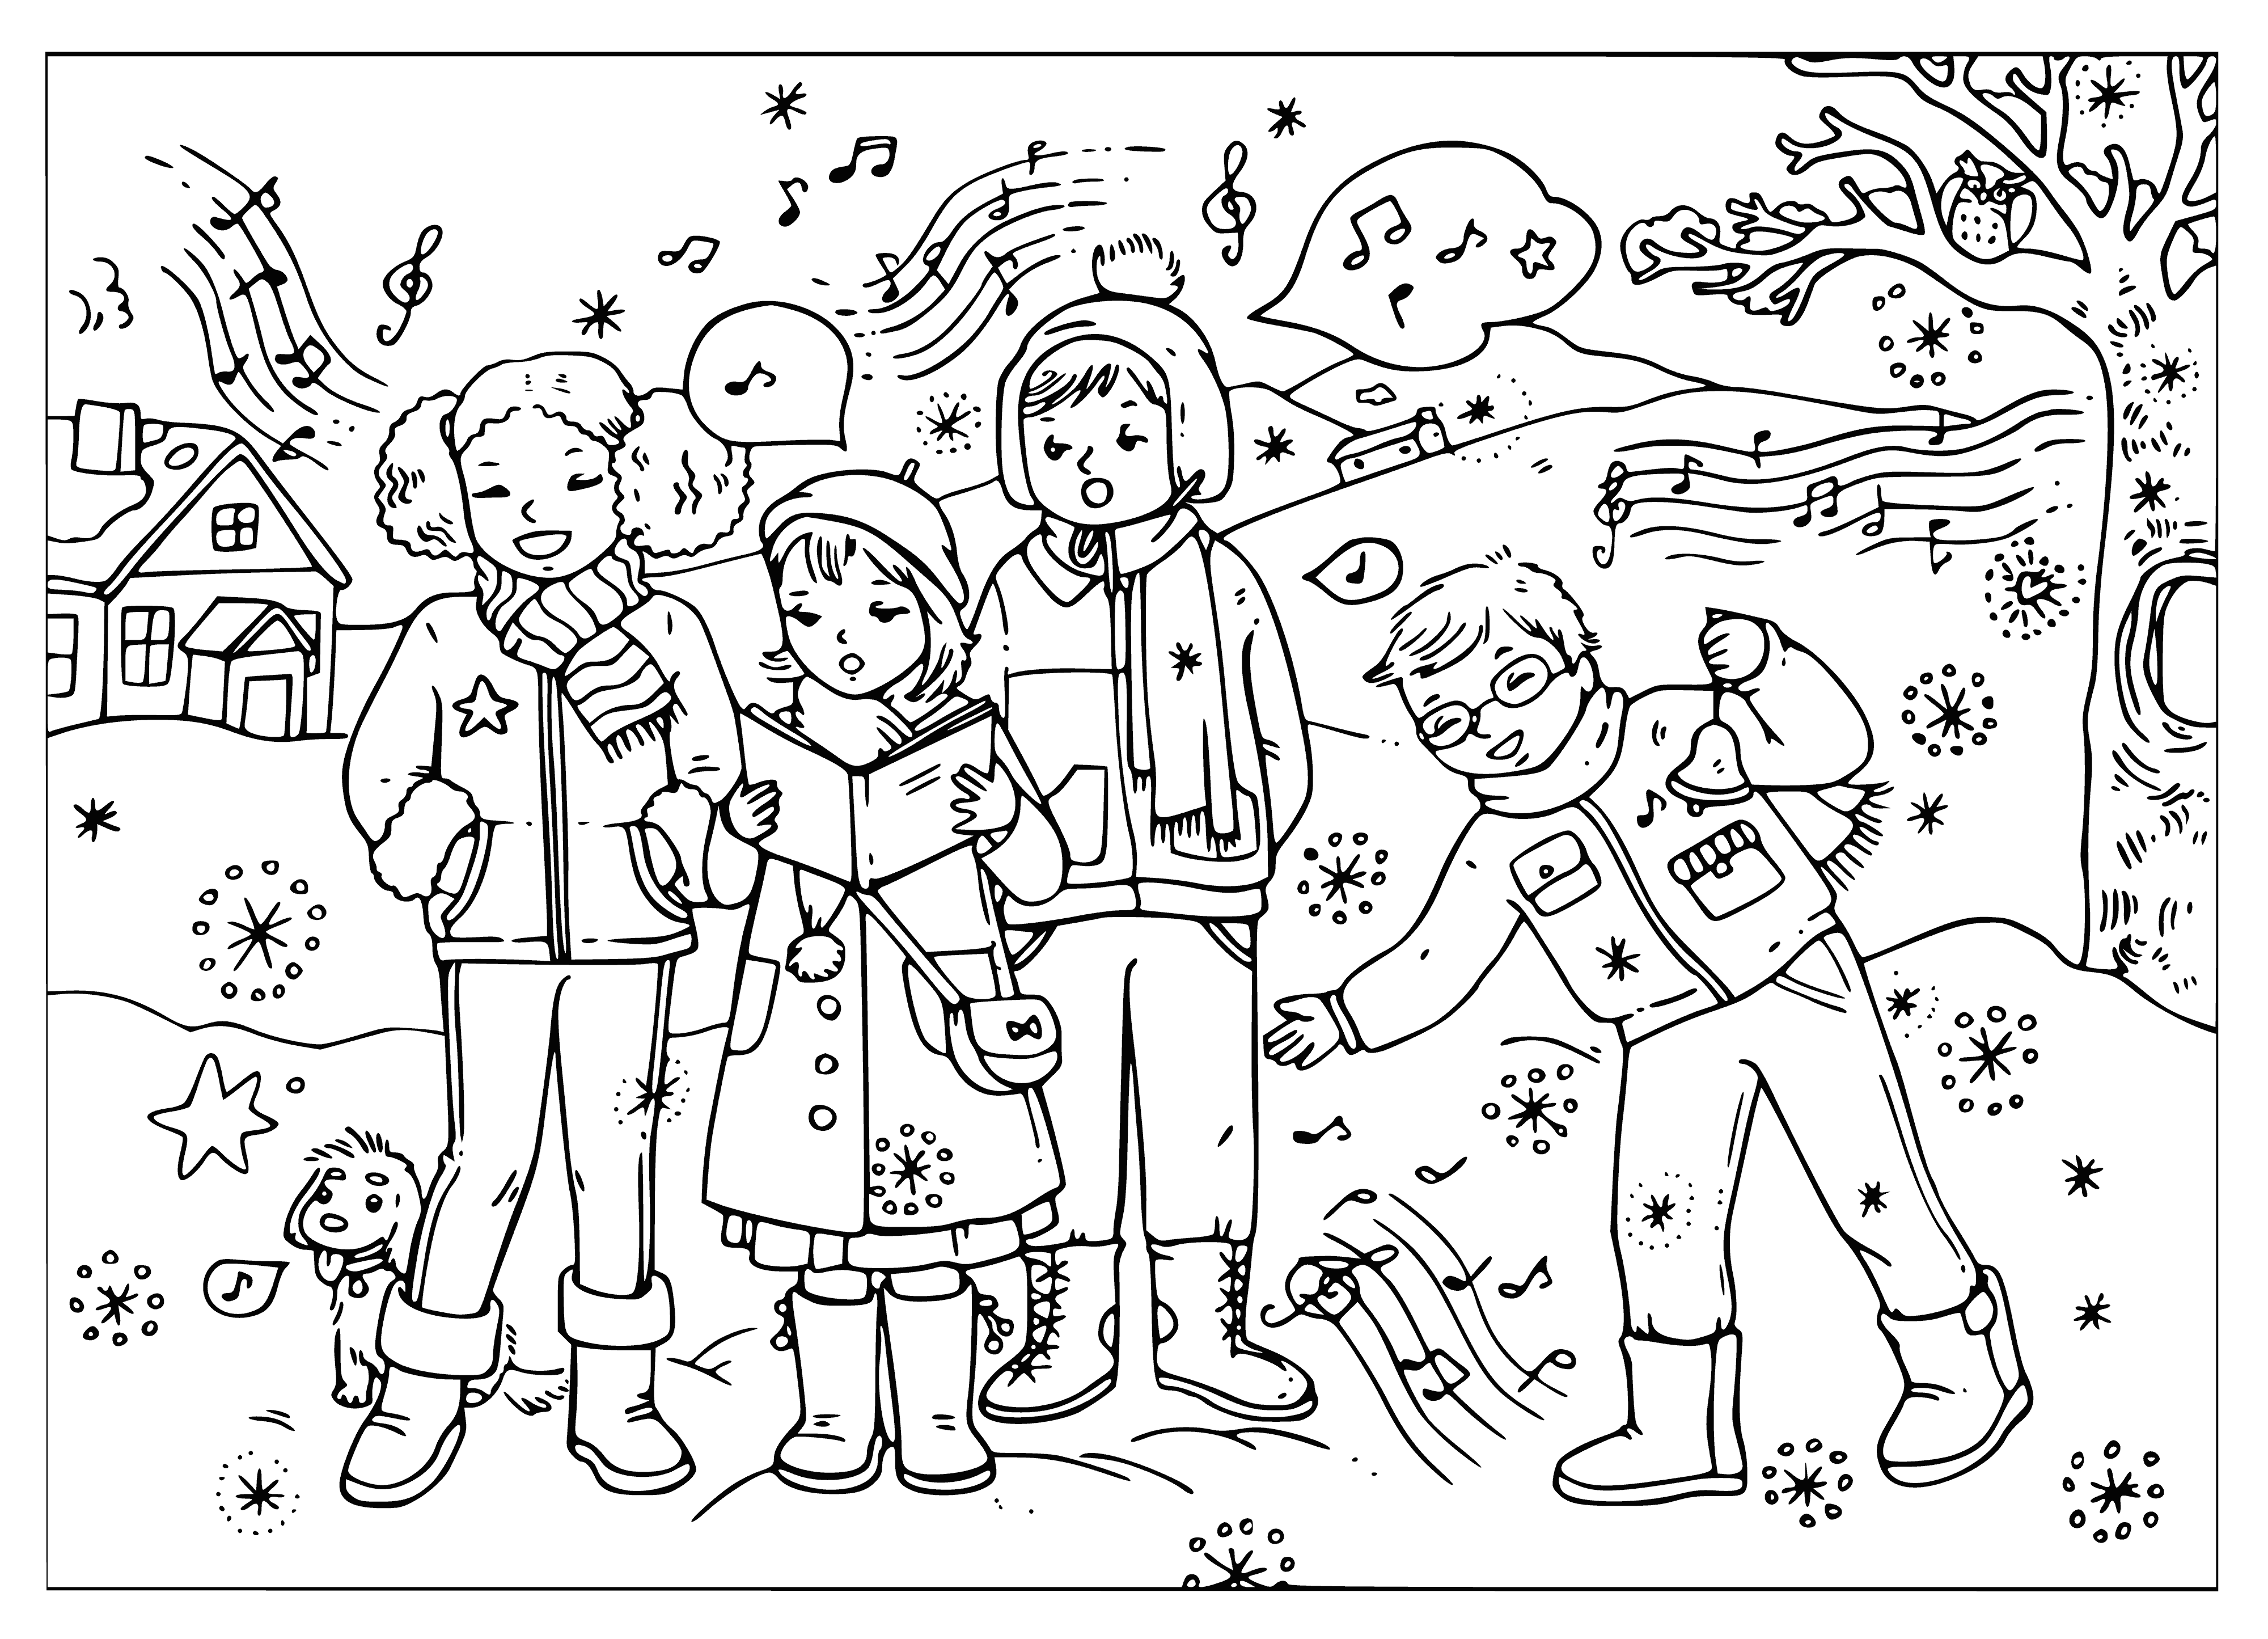 coloring page: Kids singing carols in the snow, bundled in warm clothes & holding candles, with a Christmas wreath in front. #winter #Christmas #coloring